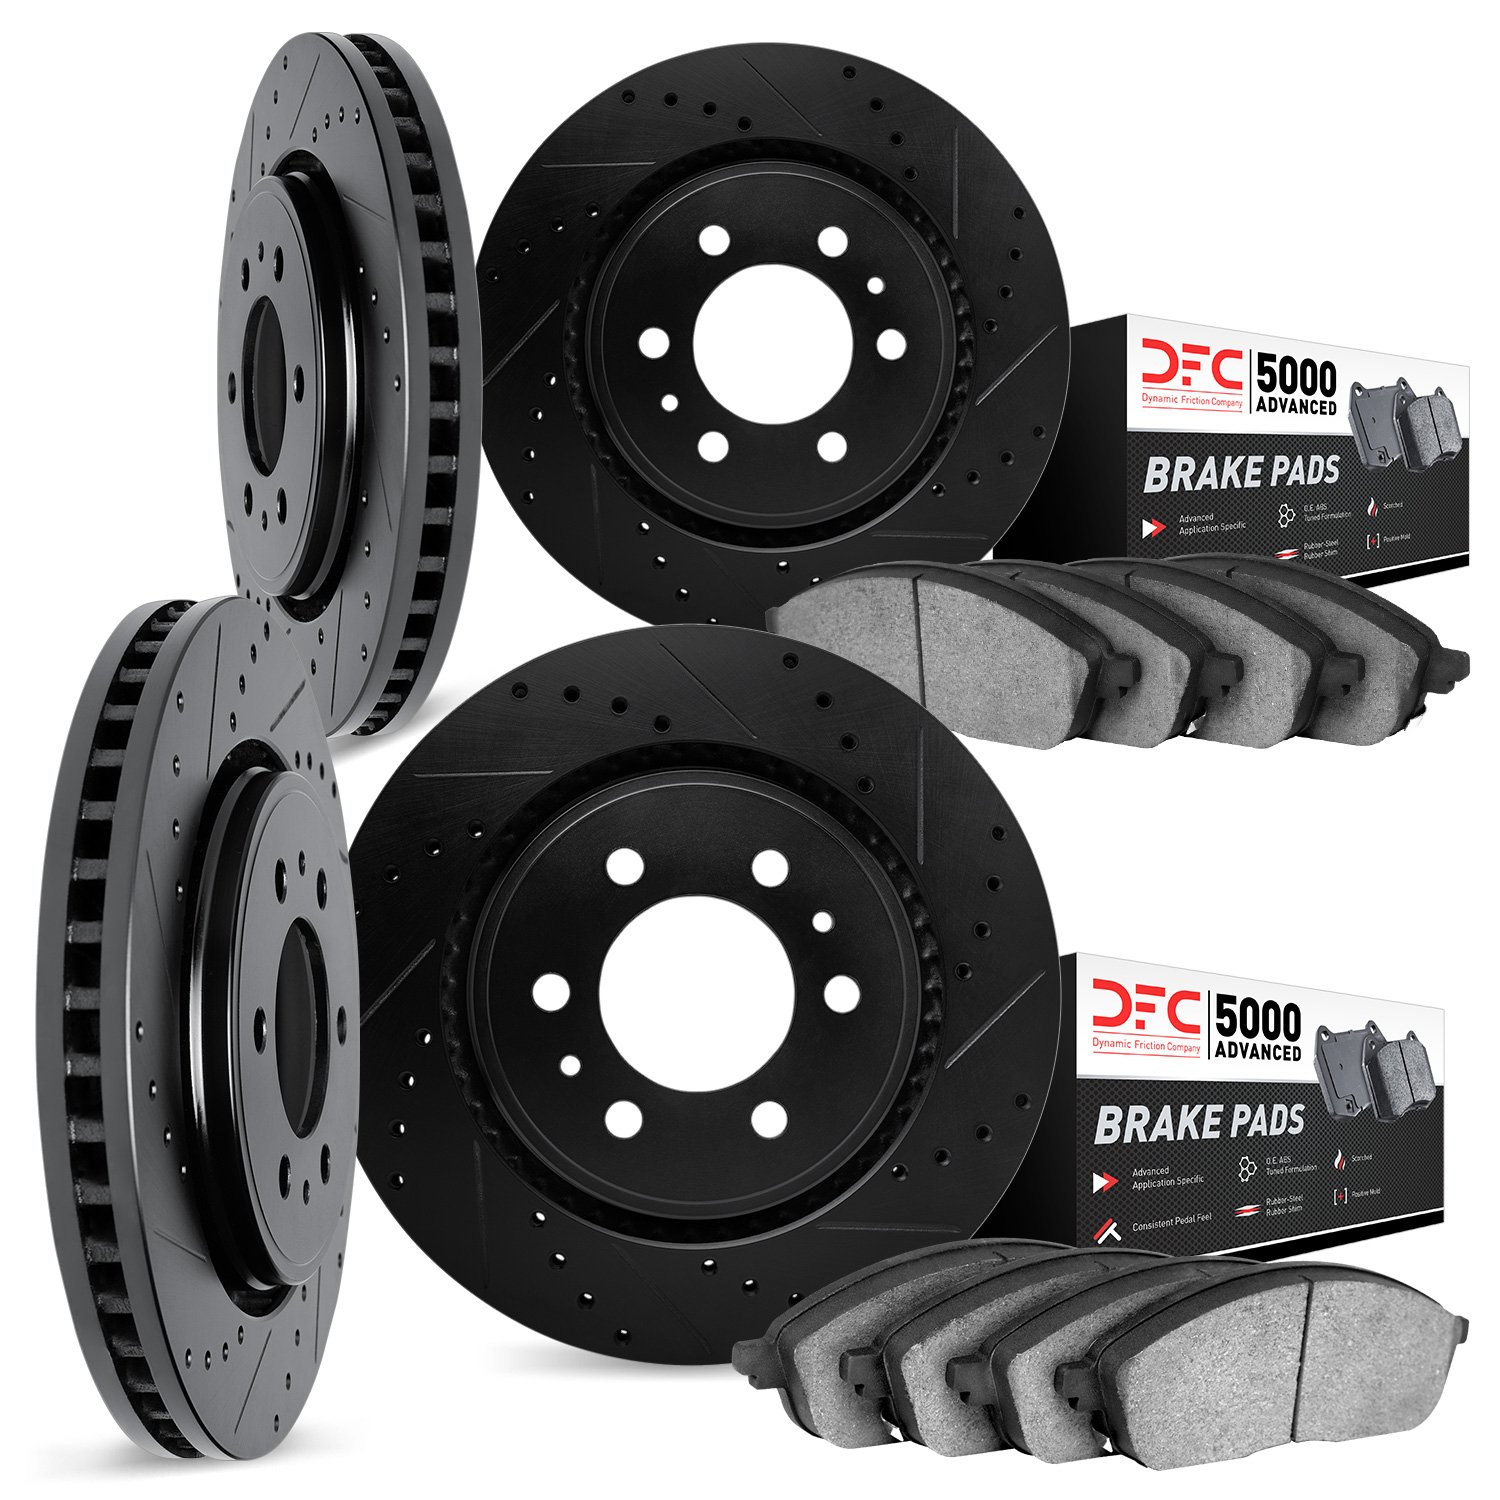 8504-54402 Drilled/Slotted Brake Rotors w/5000 Advanced Brake Pads Kit [Black], Fits Select Ford/Lincoln/Mercury/Mazda, Position